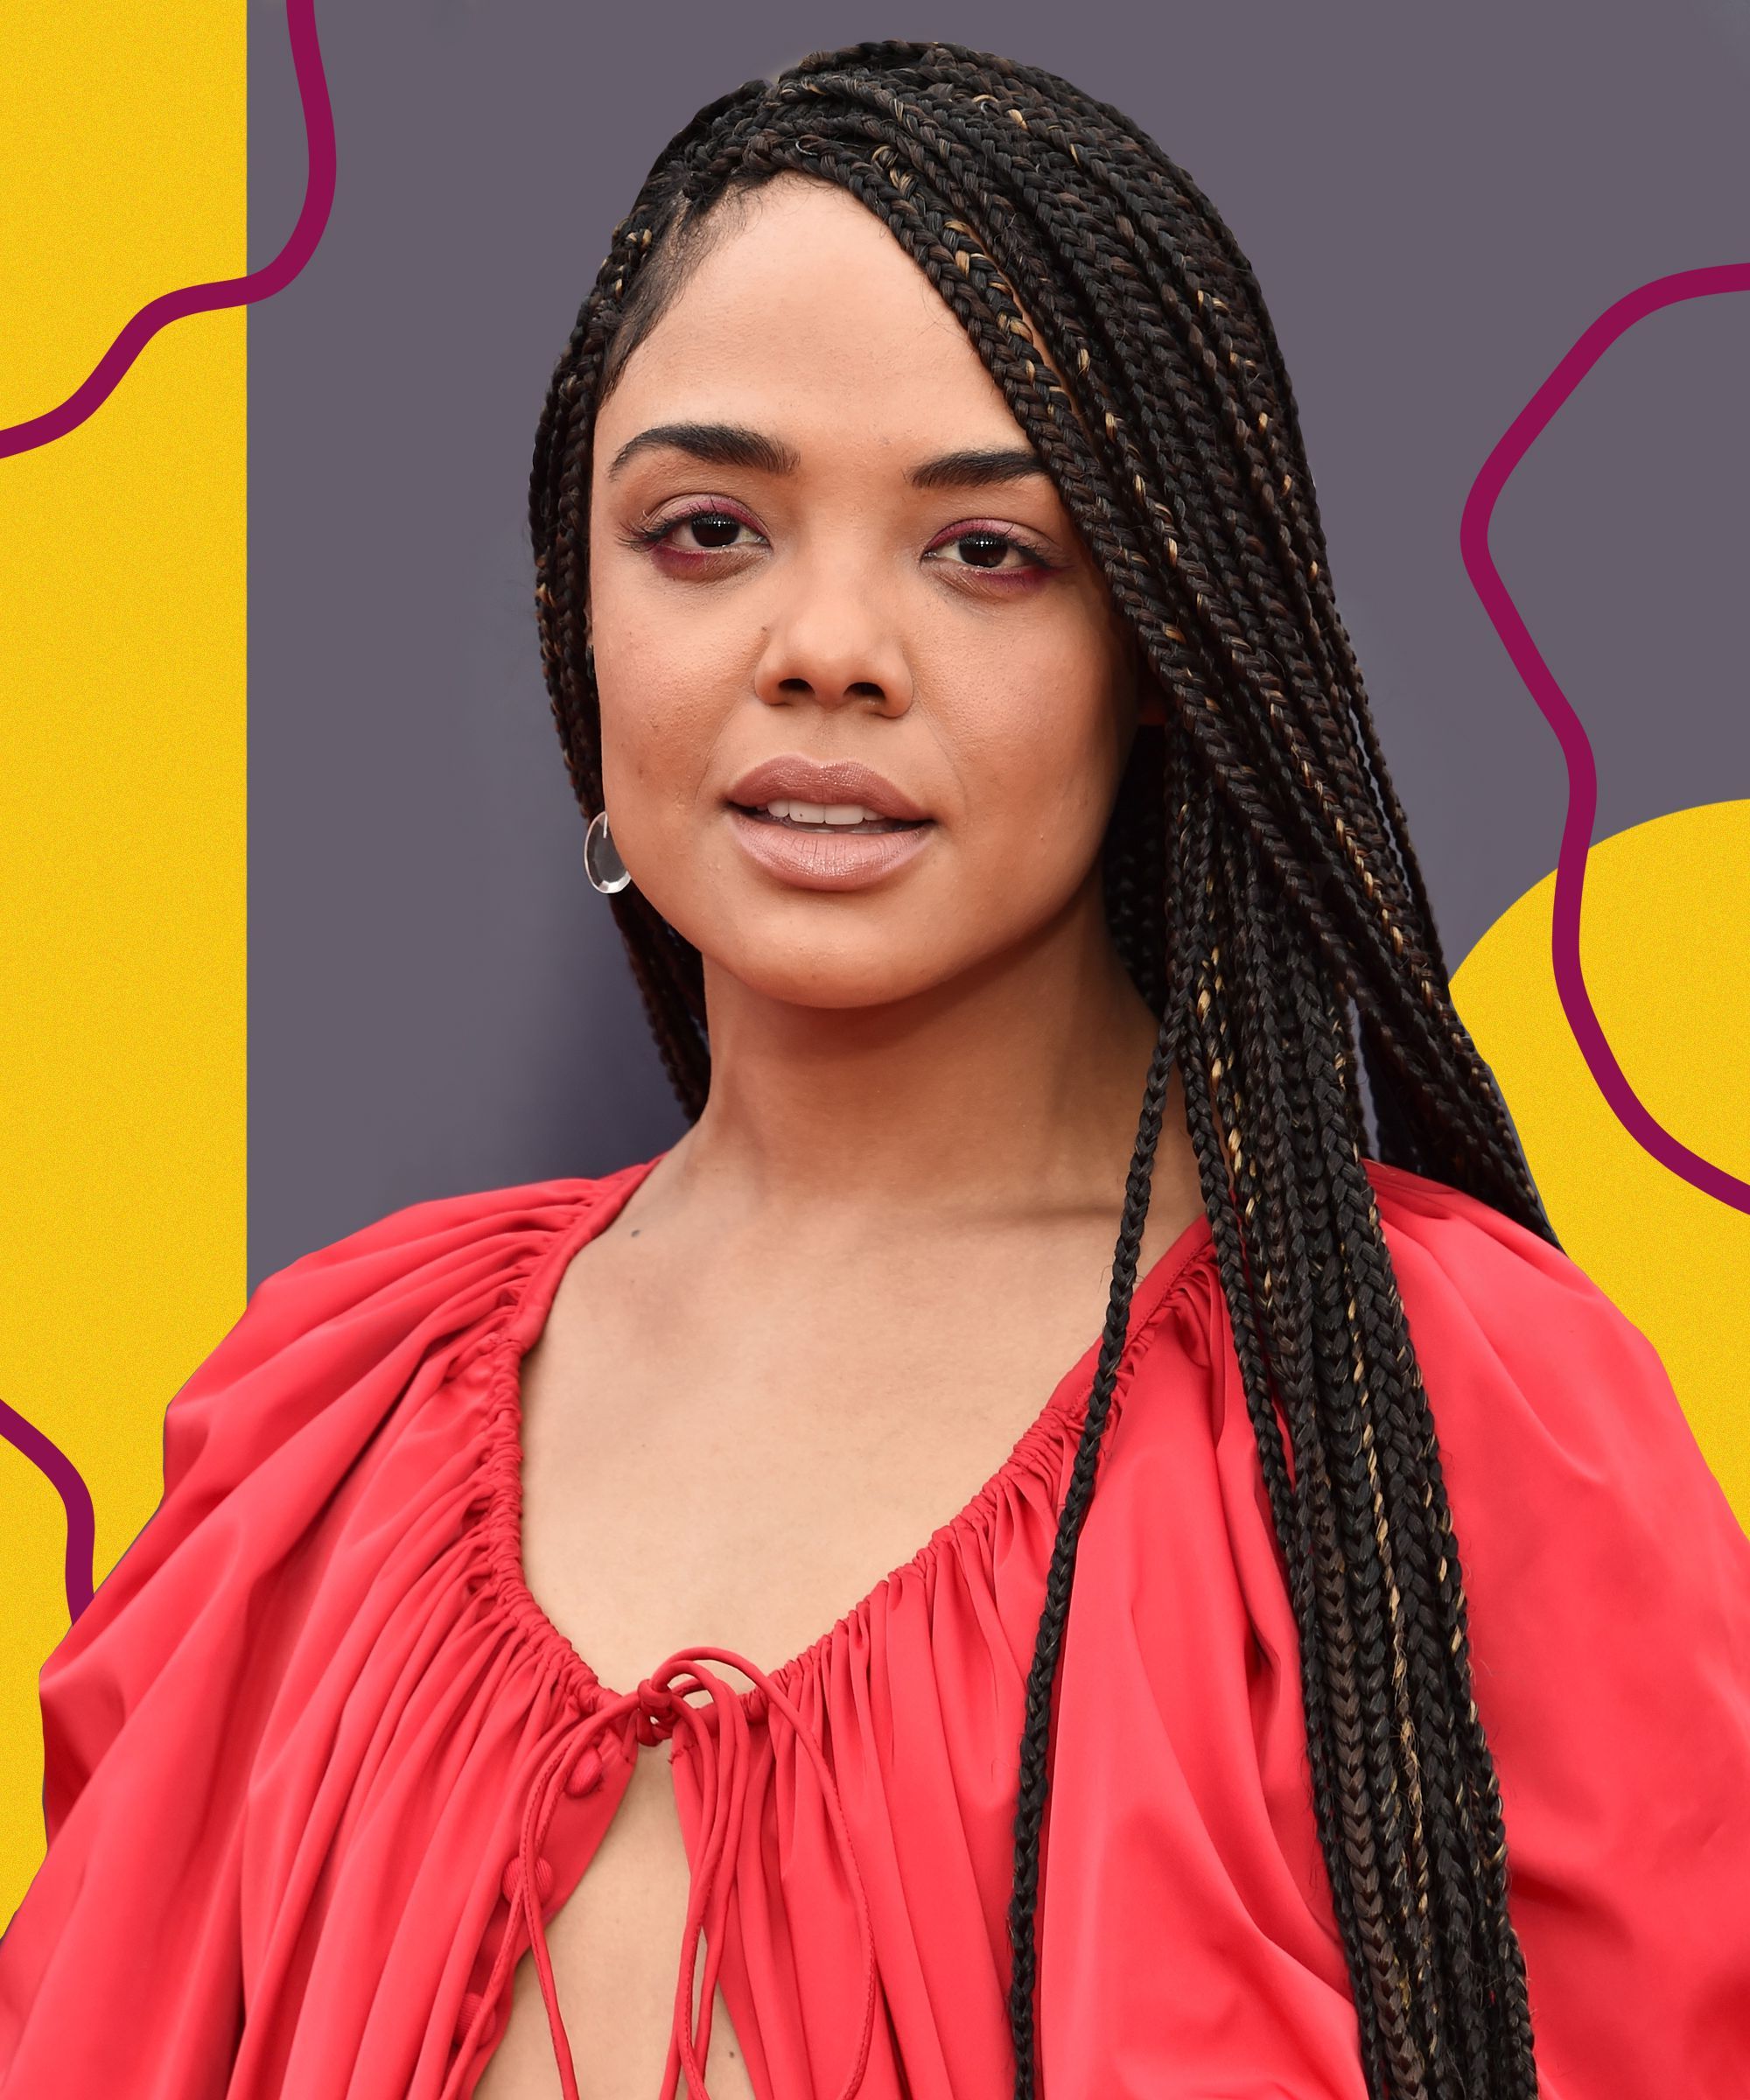 Box Braid Hairstyles We Love For Your New 2019 Look For Widely Used Half Up Box Bob Braid Hairstyles (View 17 of 20)